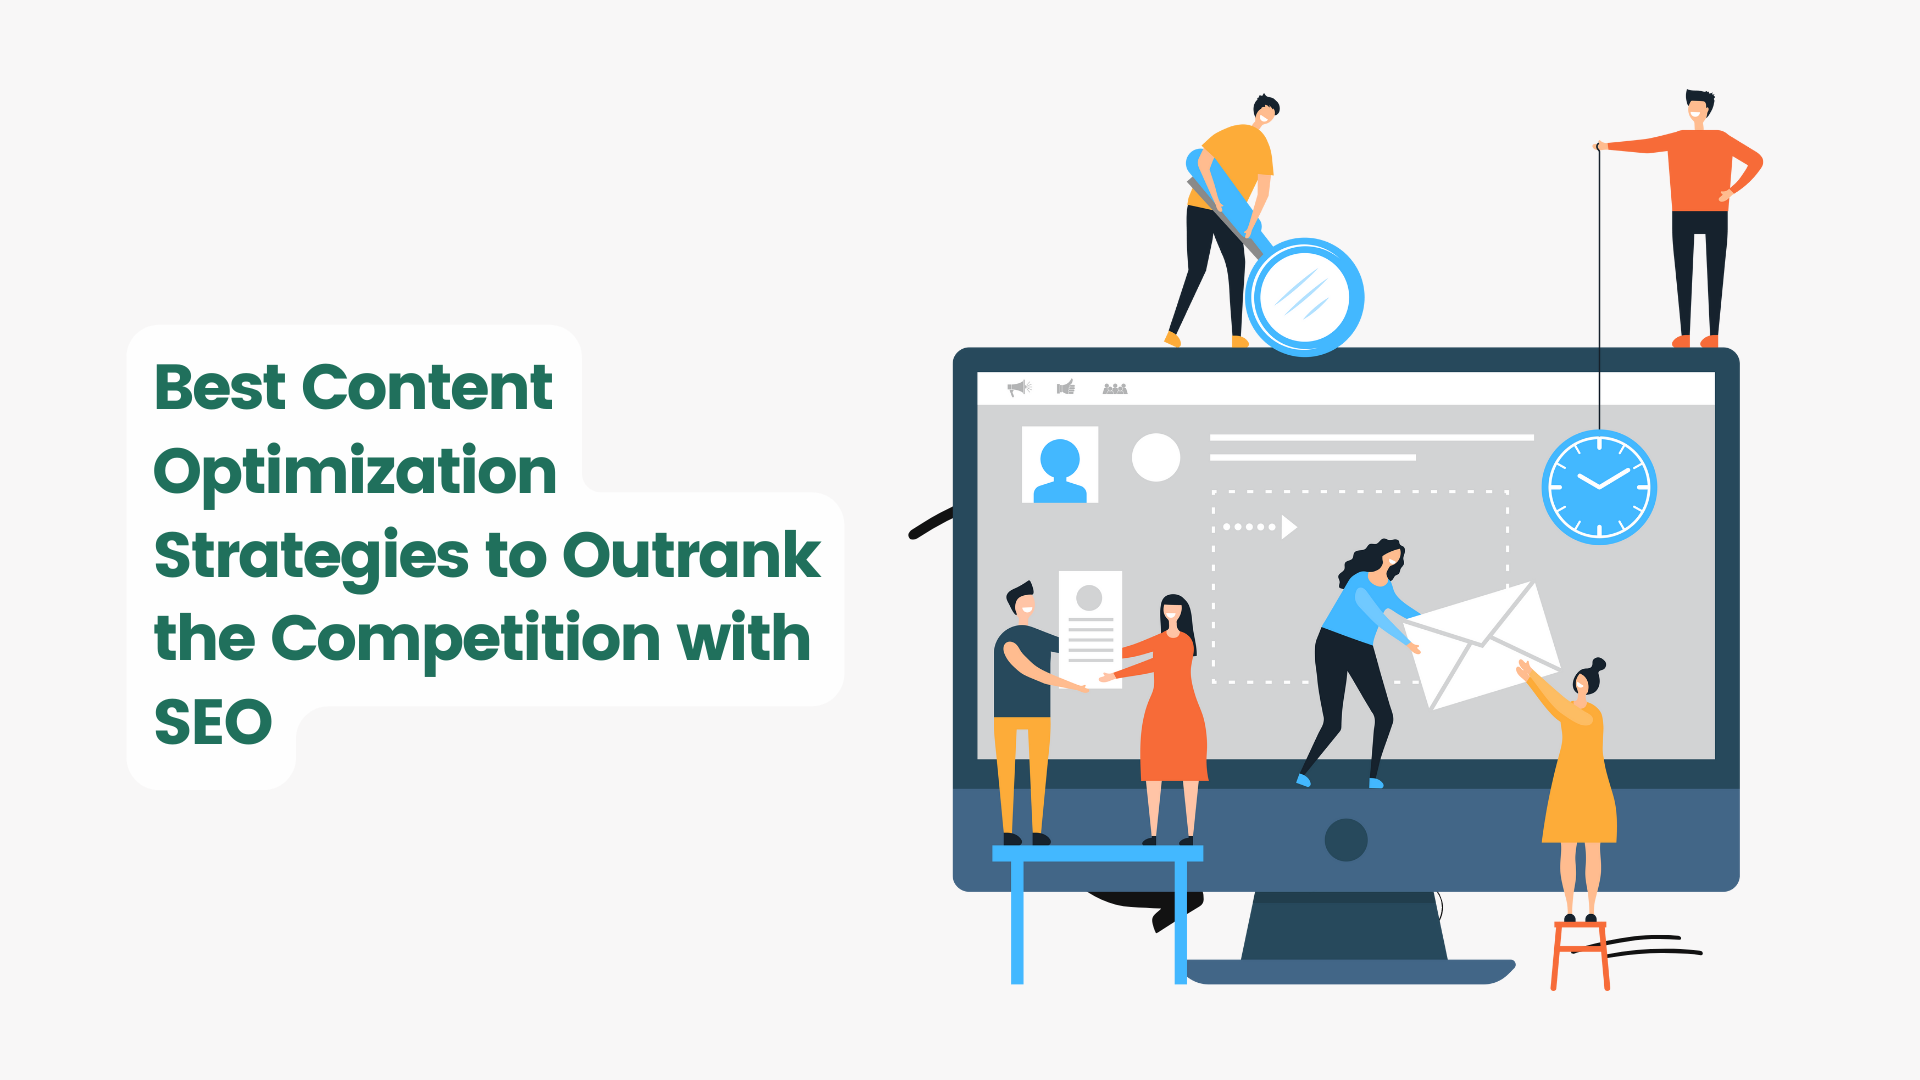 Best Content Optimization Strategies to Outrank the Competition with SEO